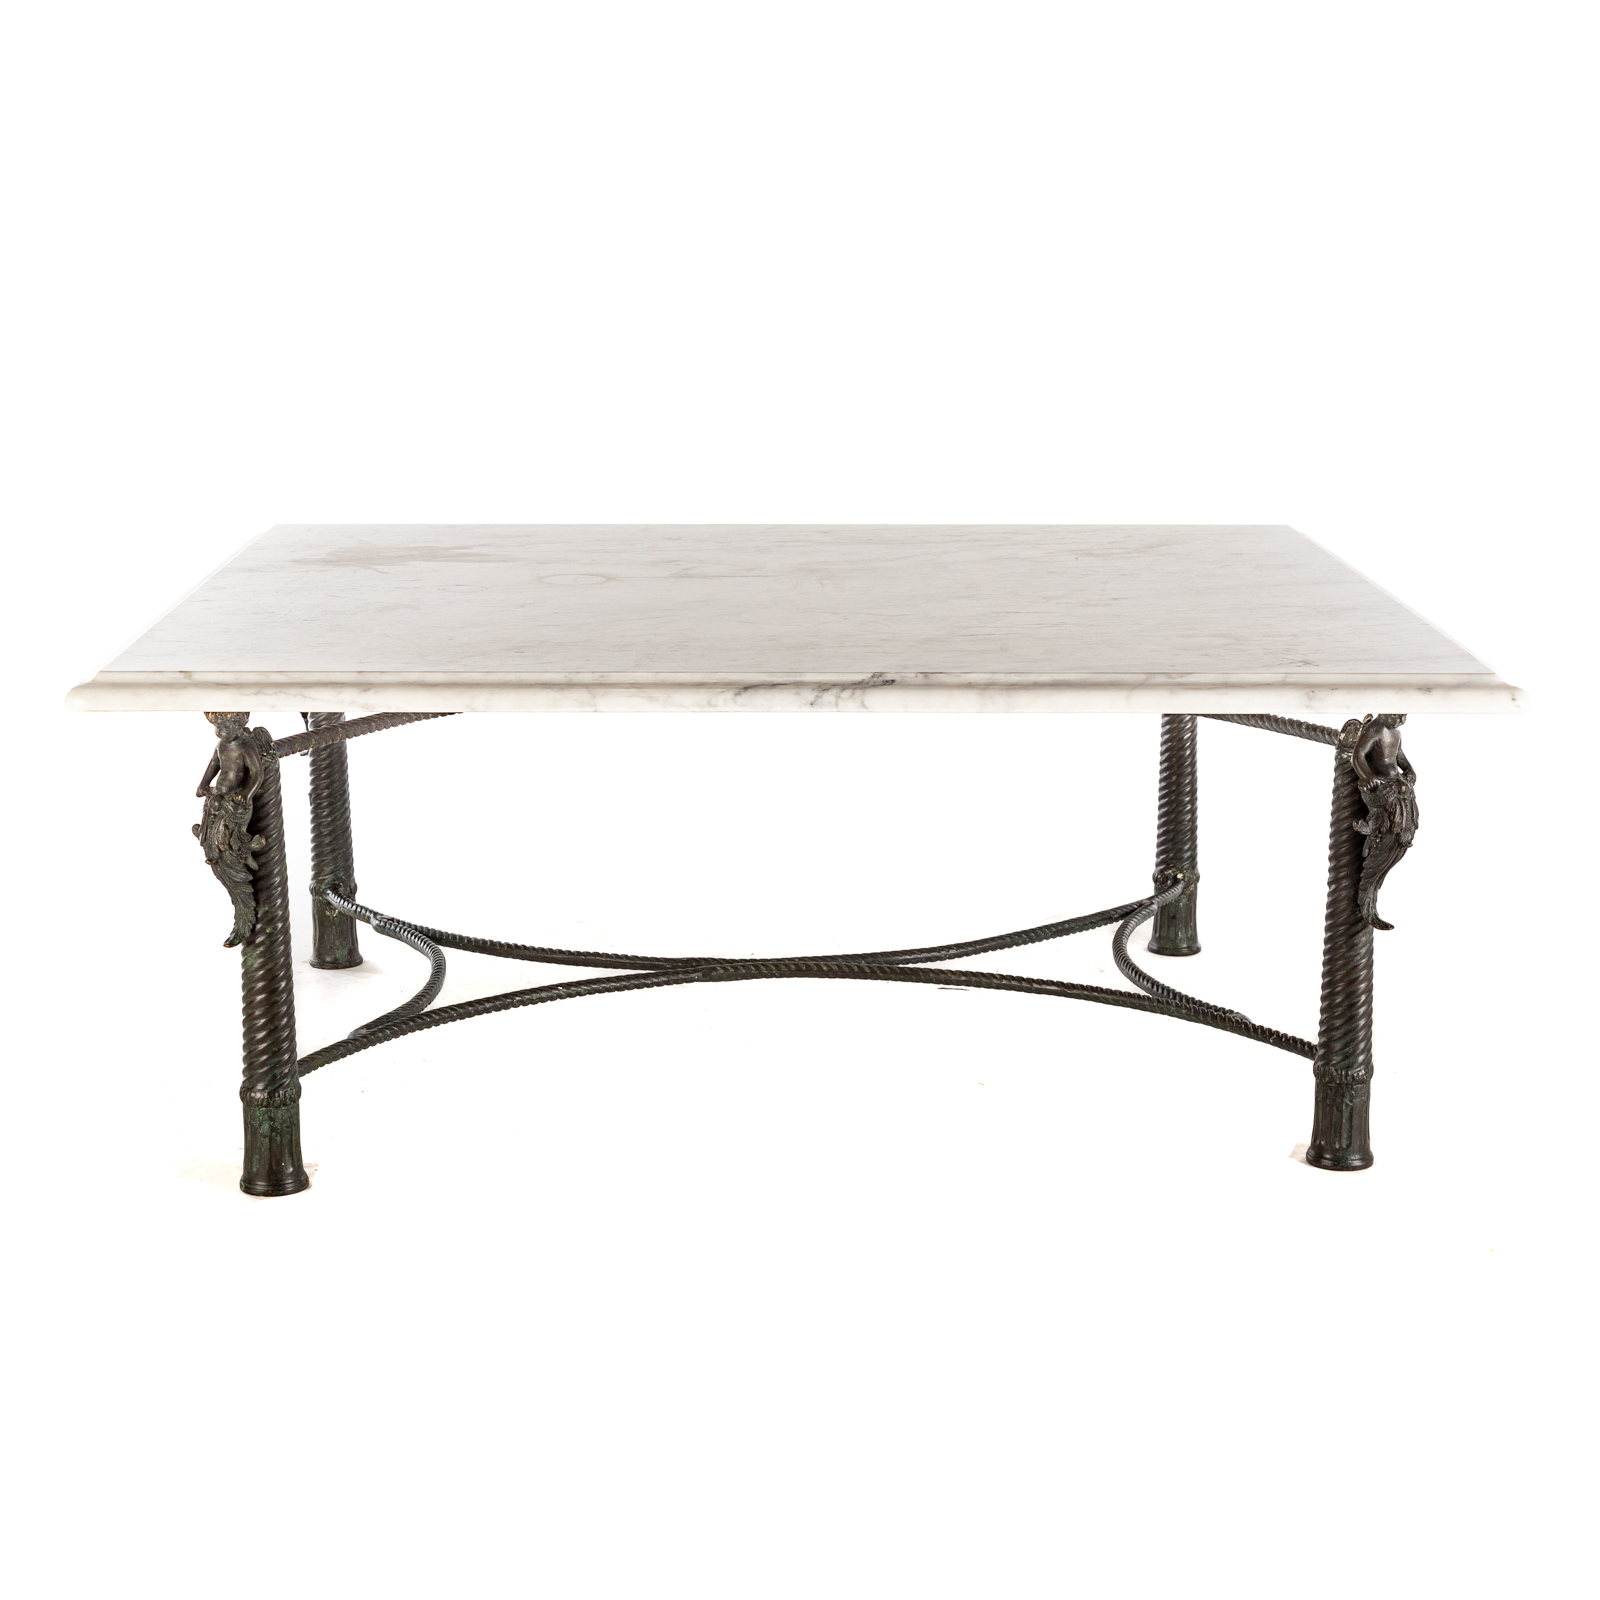 MARBLE TOP TABLE WITH FIGURAL METAL